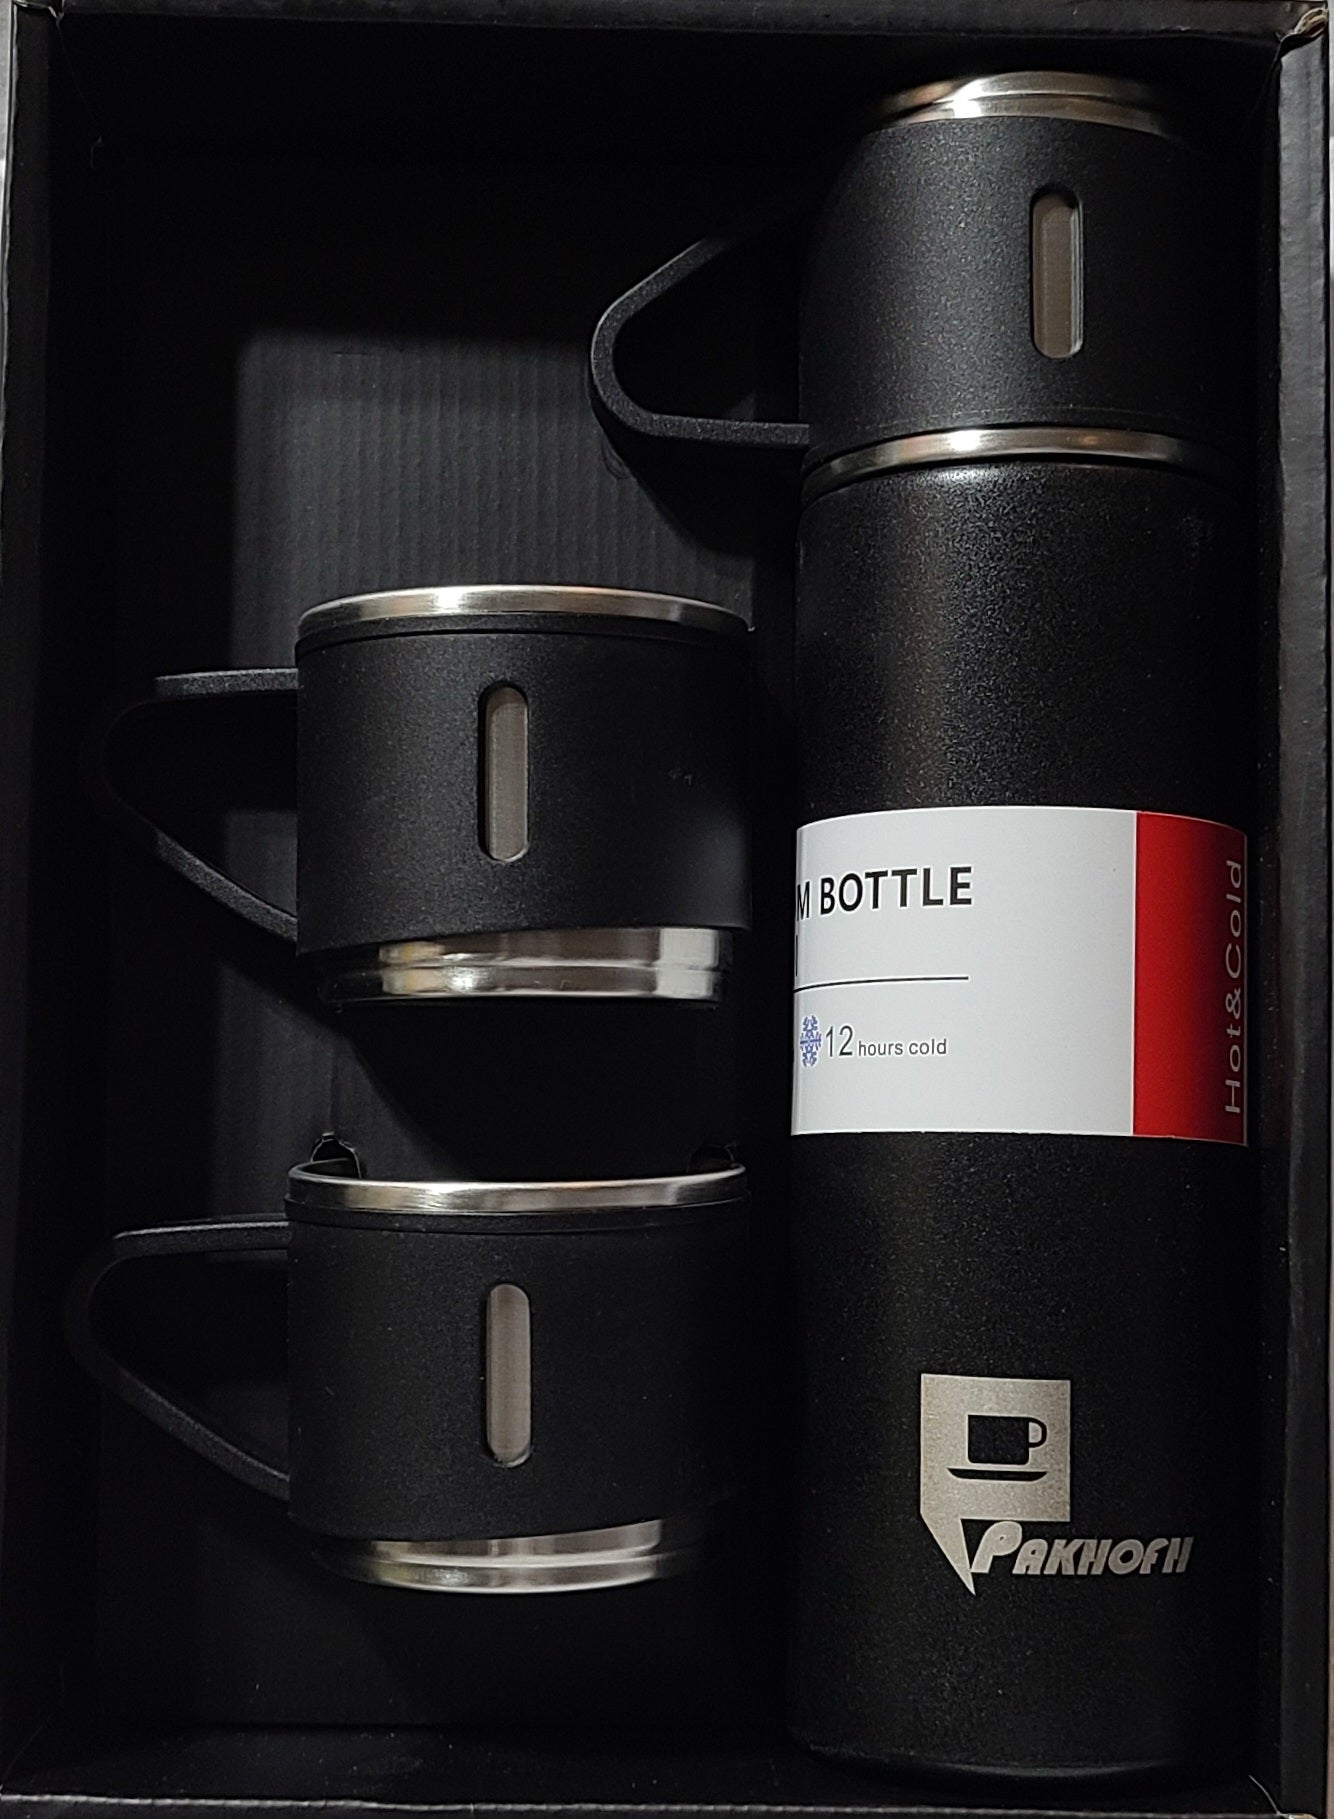 Stainless Steel 500ml Capacity Vacuum Flask Set with 2 Cups